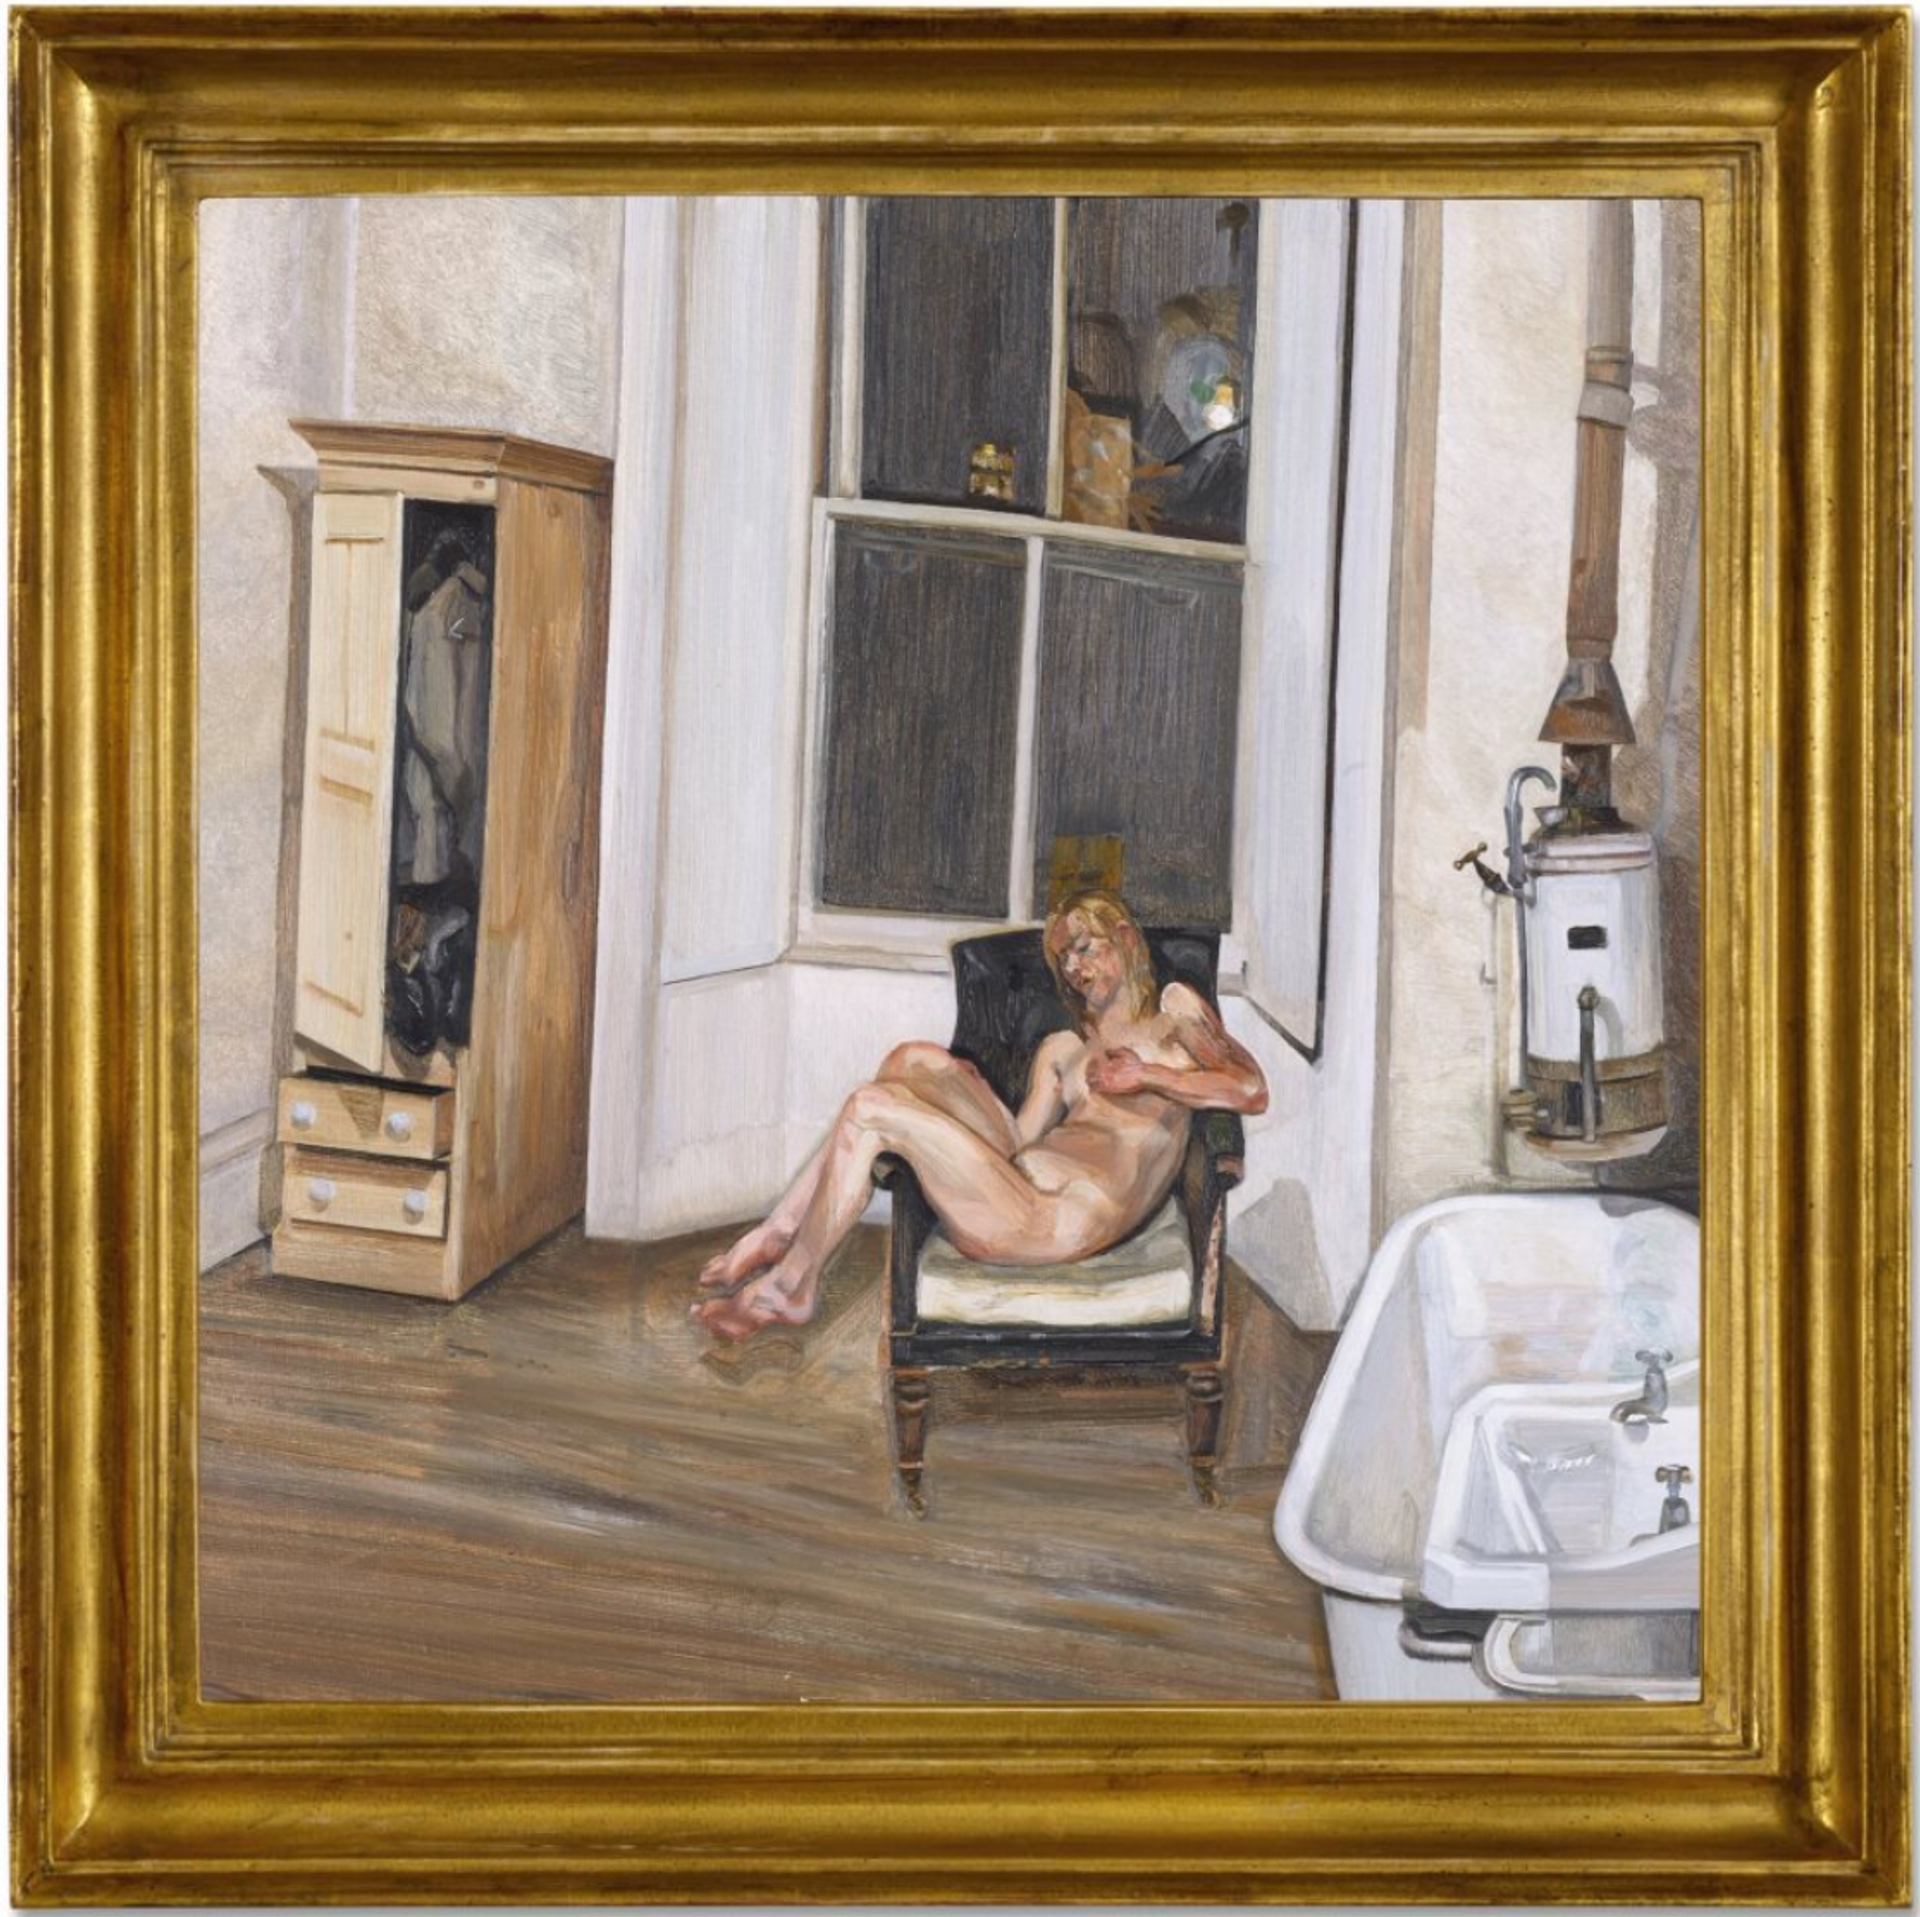 An oil on canvas work by Lucian Freud depicting a nude woman reclining on an armchair.